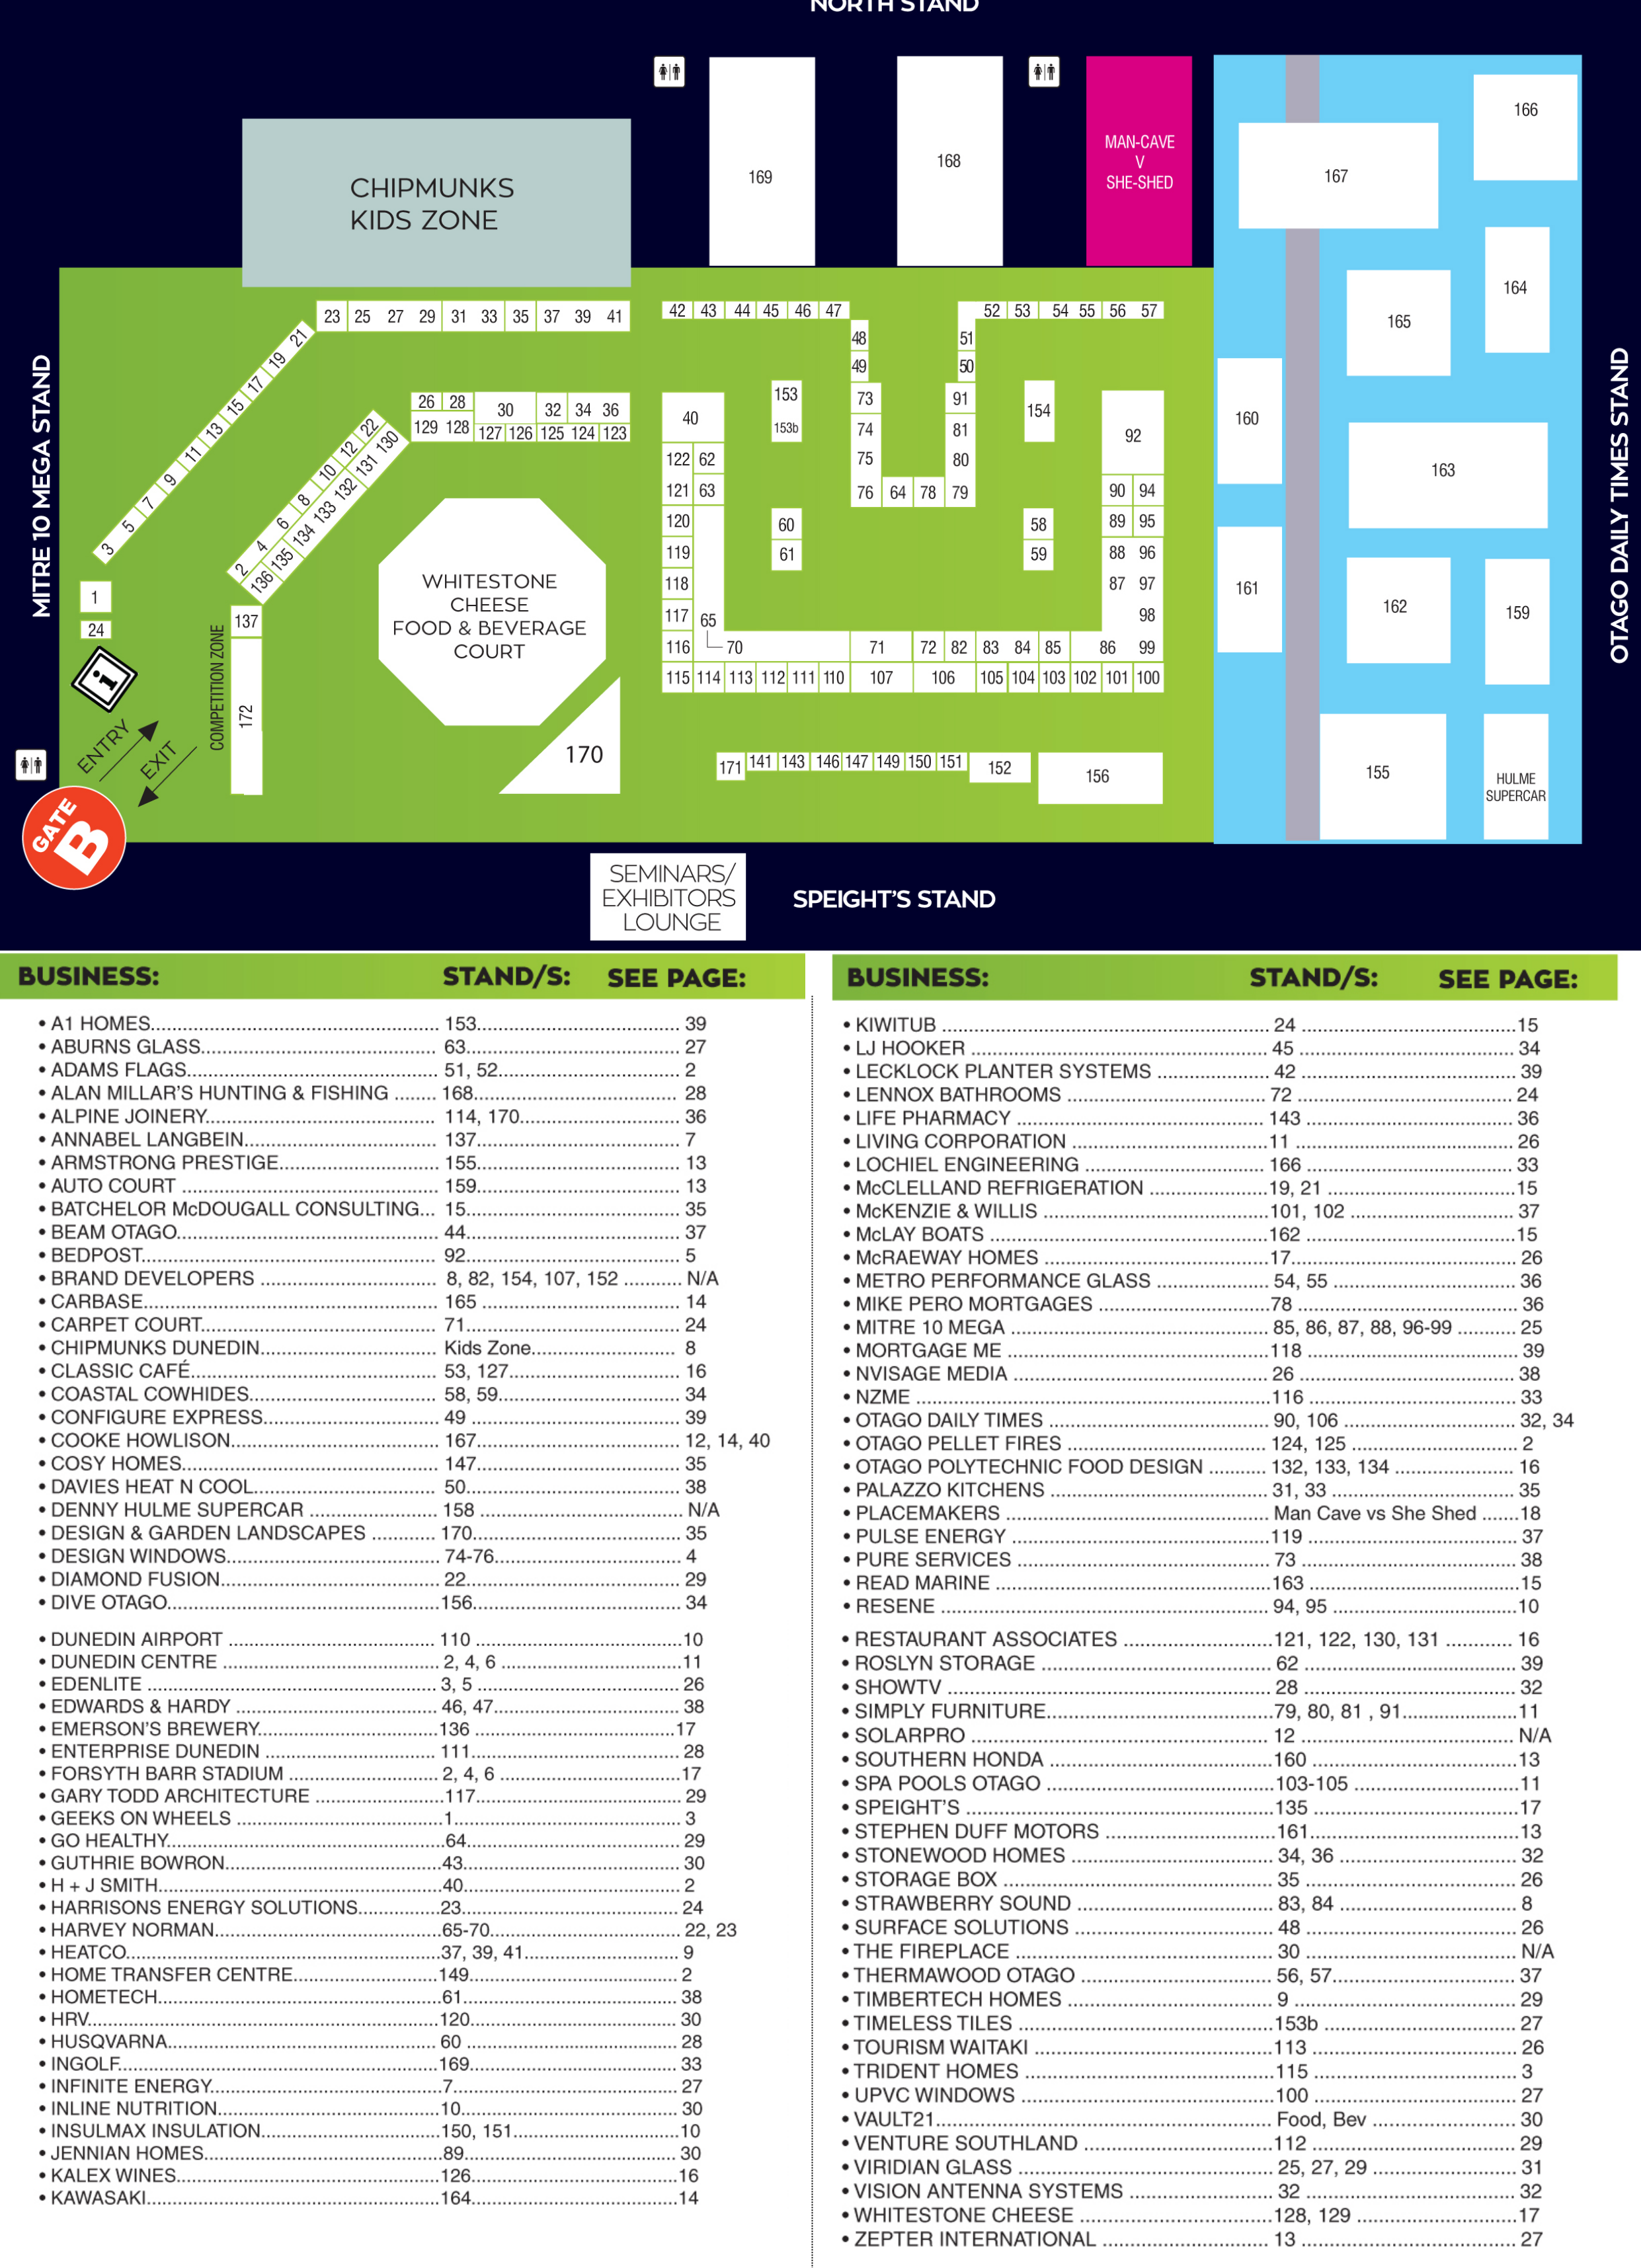 exhibitor_map.png